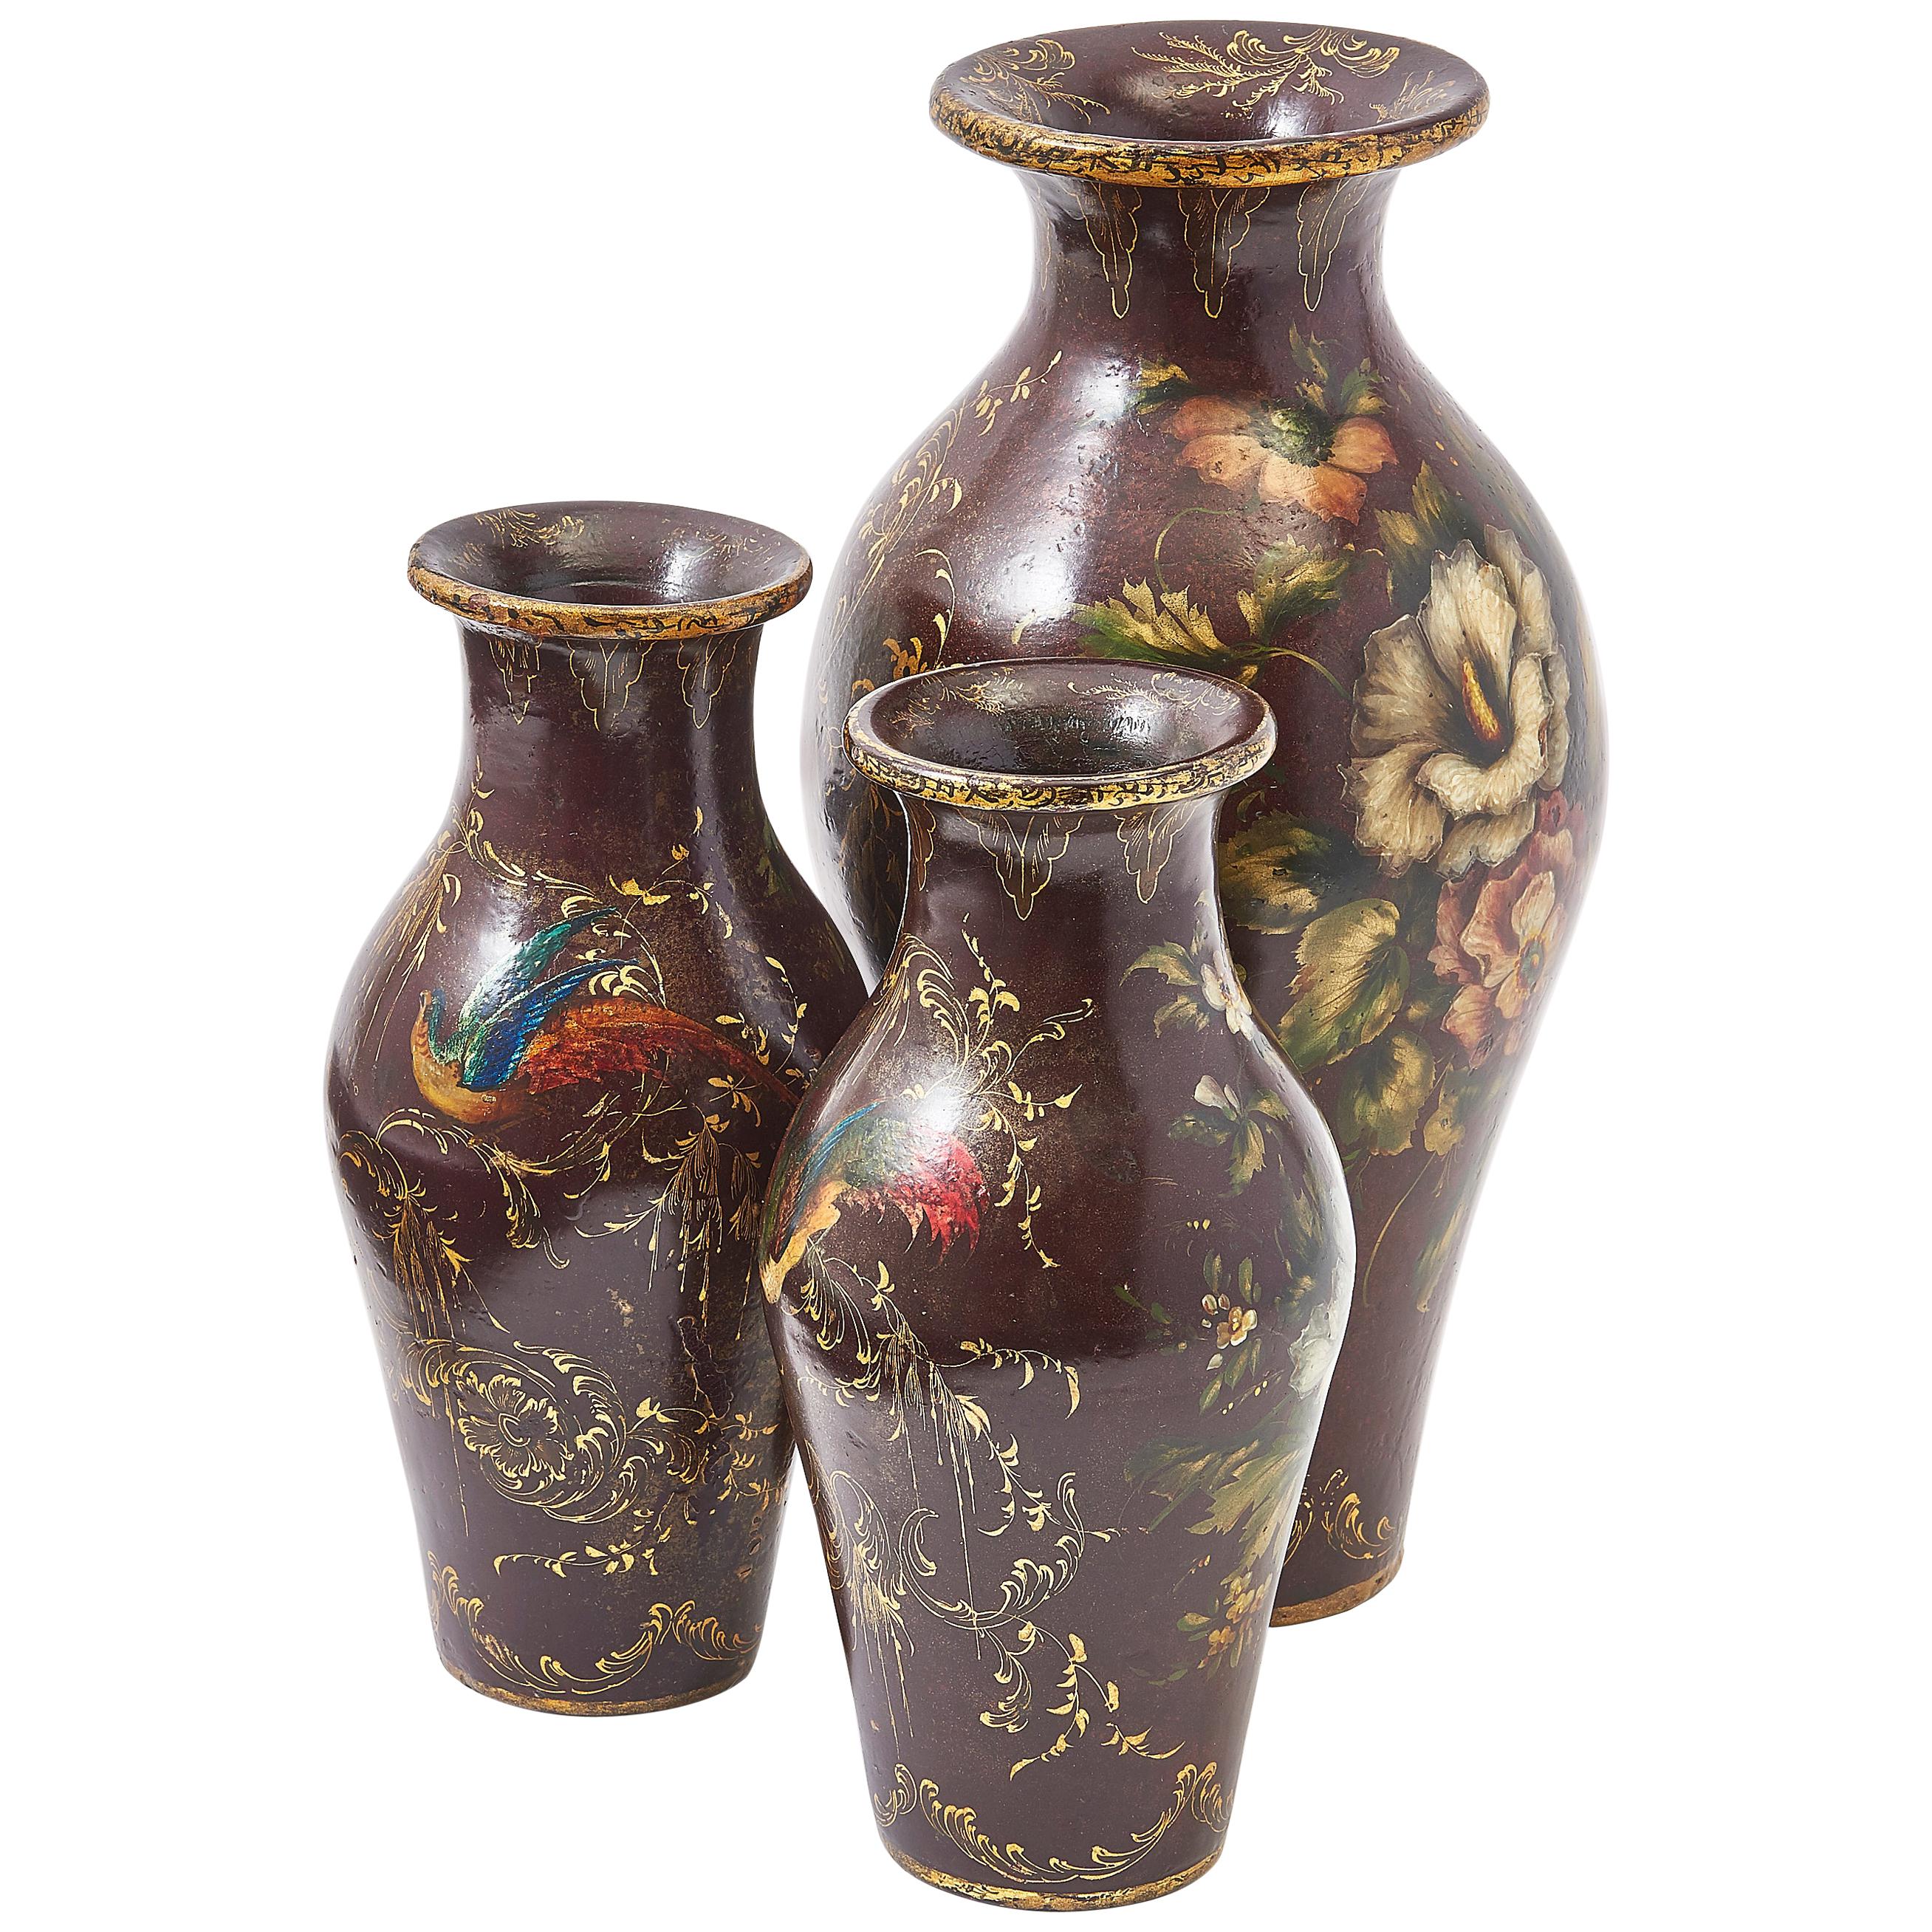 Garniture of Three Papier Mâché Floral Baluster Vases, English, circa 1860 For Sale